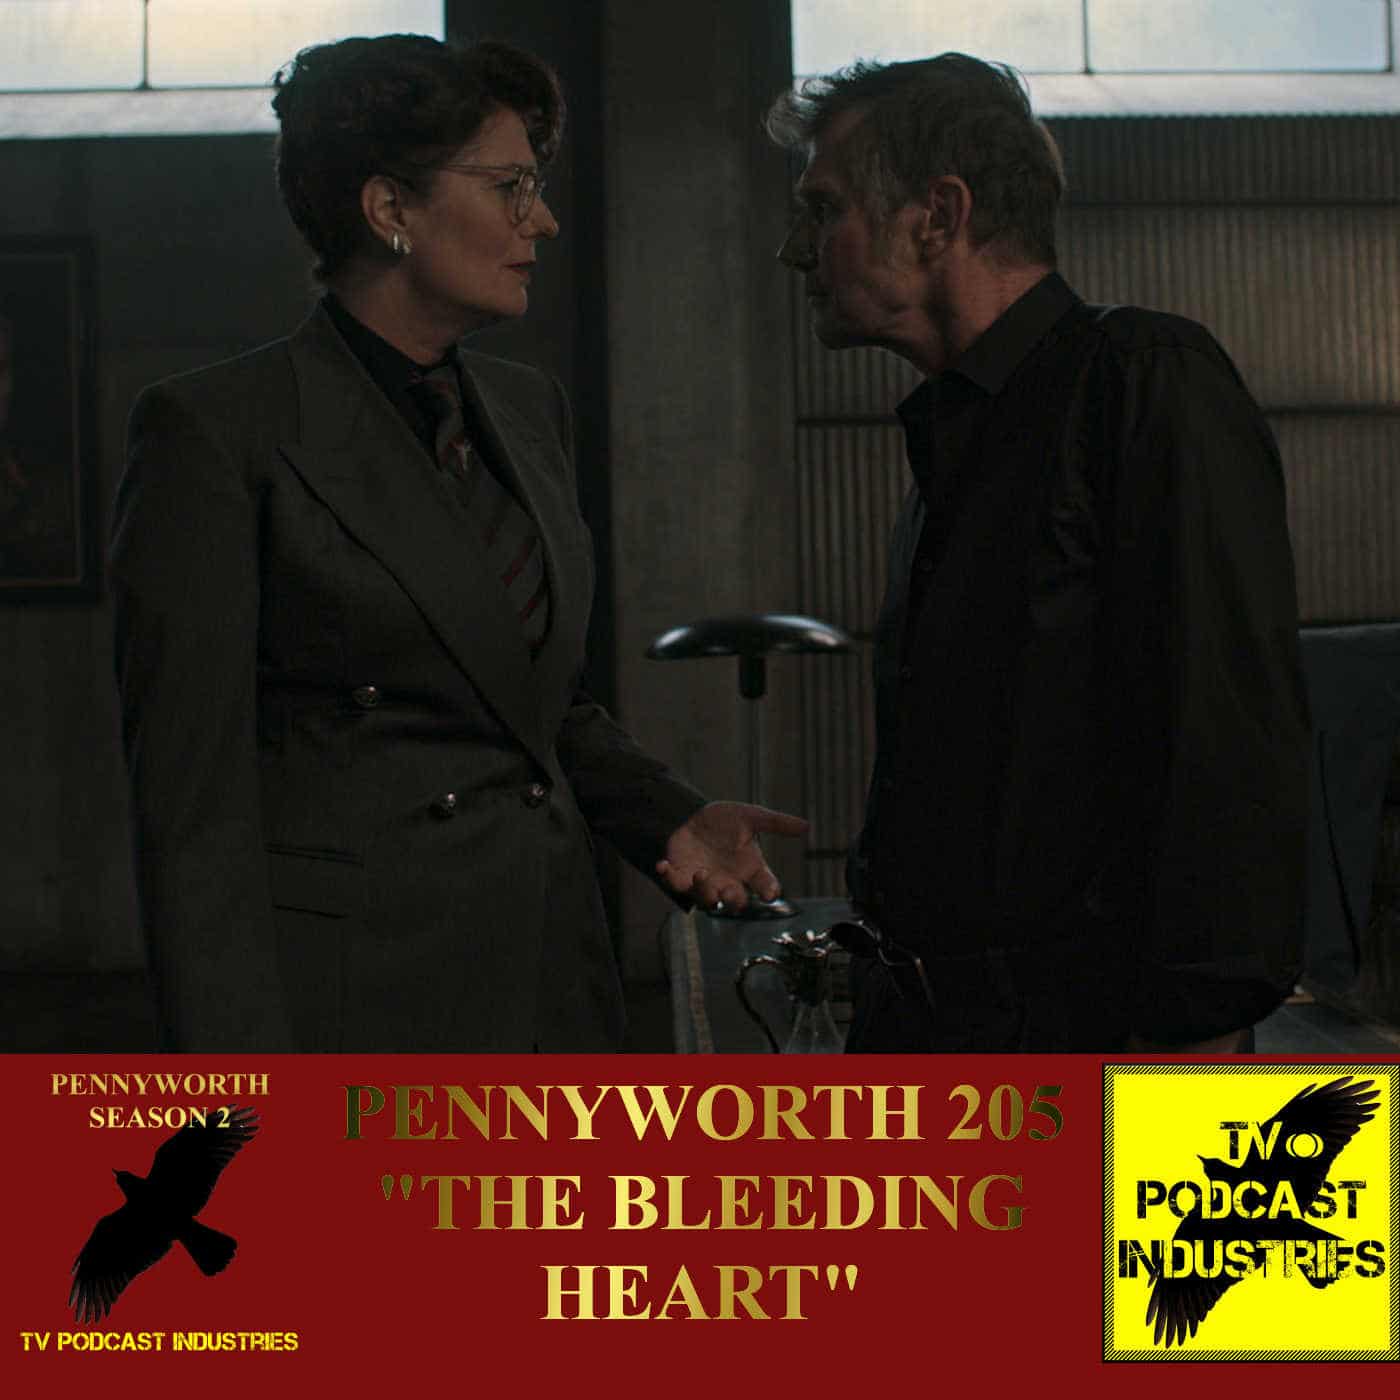 Pennyworth Season 2 Episode 5 "The Bleeding Heart" Podcast by TV Podcast Industries